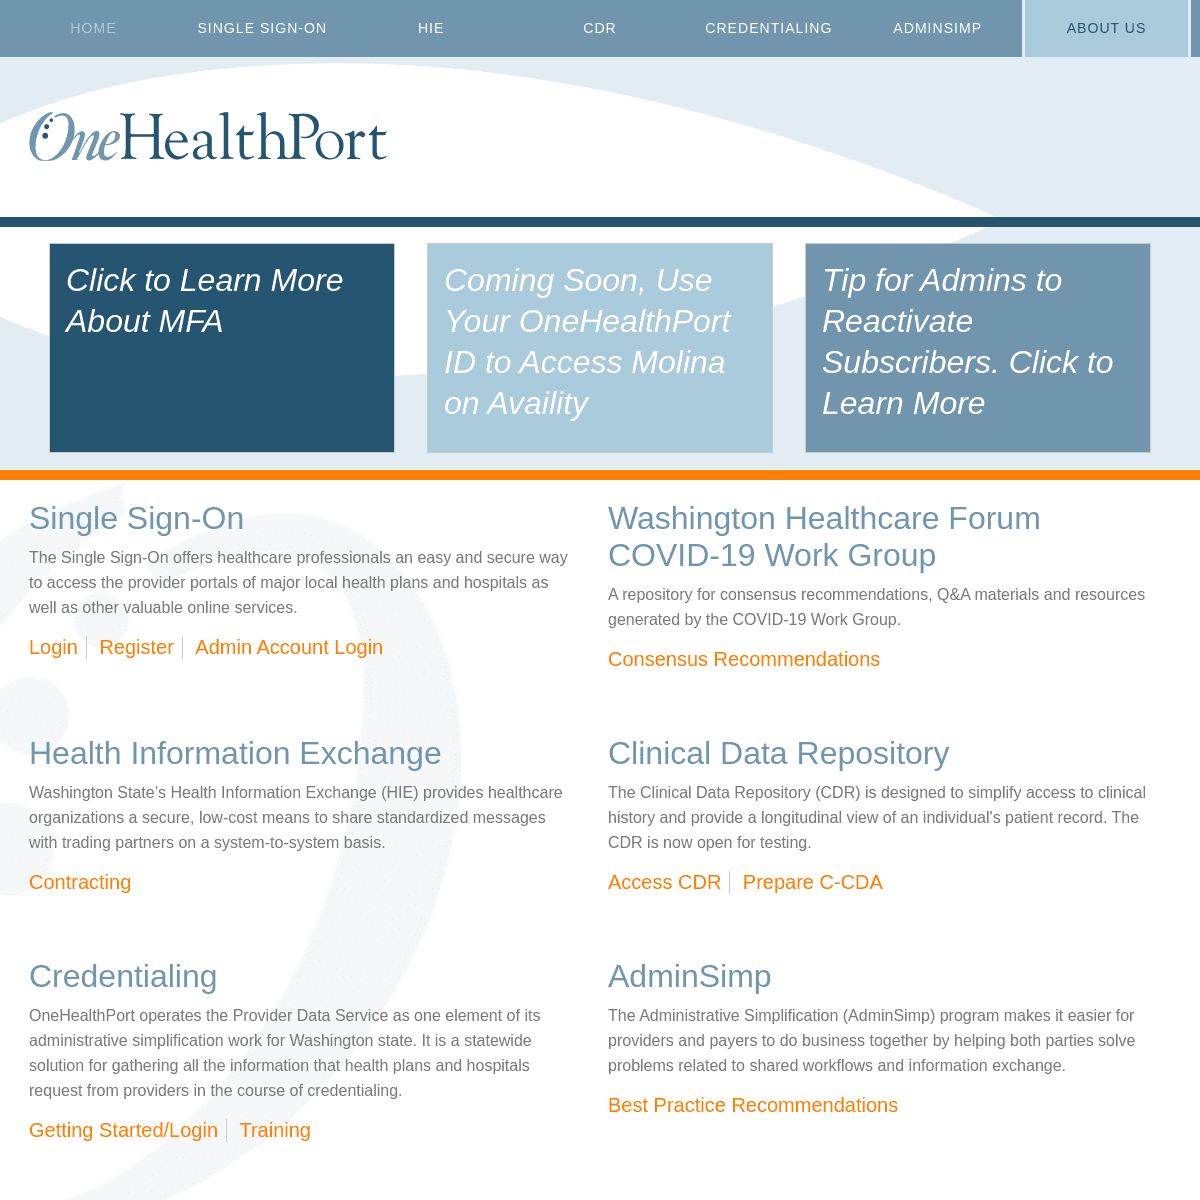 A complete backup of https://onehealthport.com